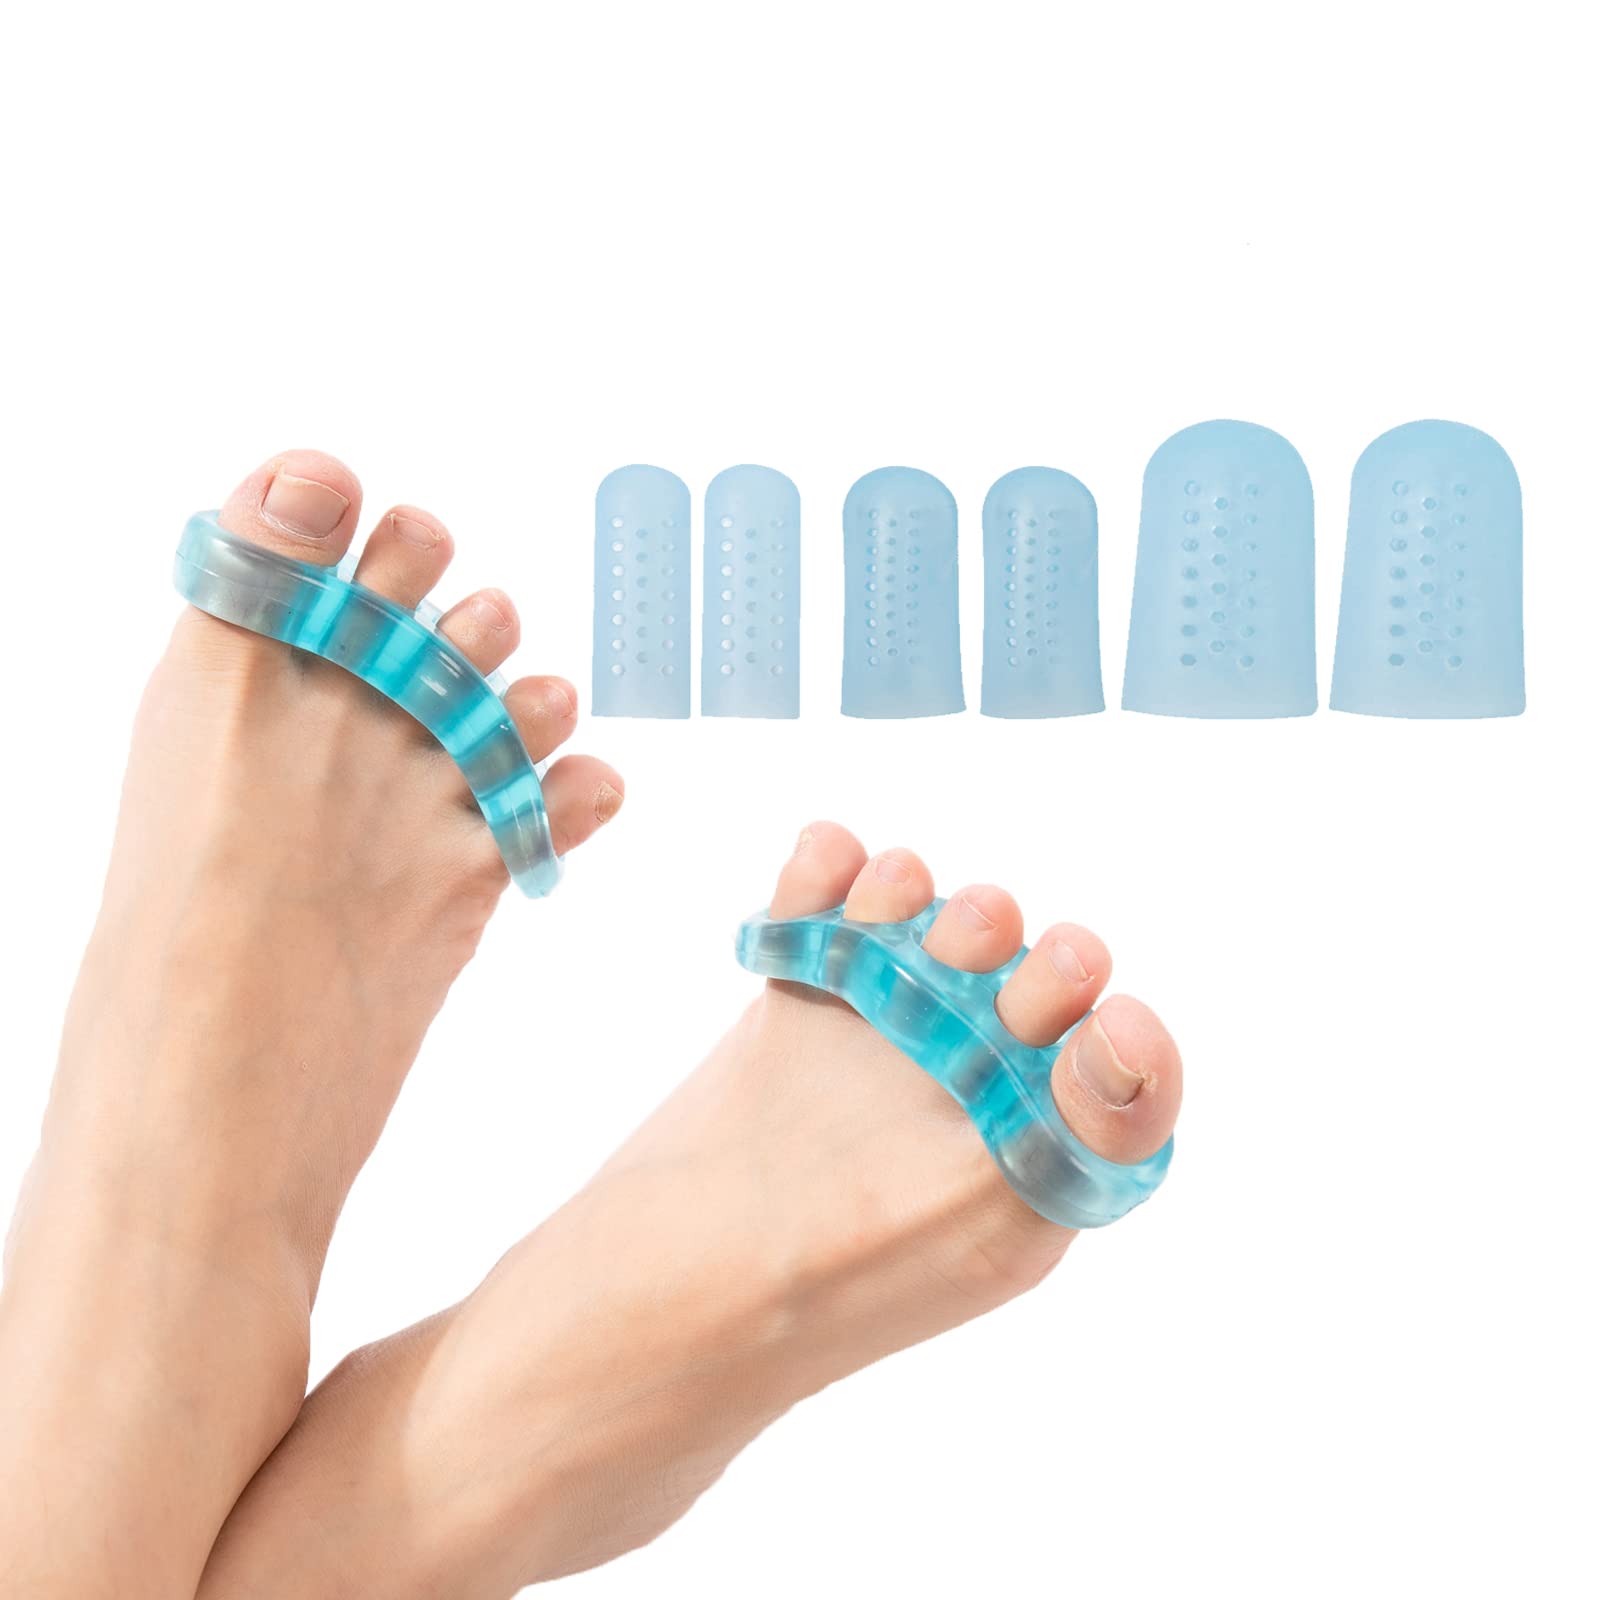 2 Pairs Yoga Toe Straighteners Foot Stretcher Big Toes Spacers Toe  Spreaders(4 pcs) Gel Toe Separator Bunion Corrector (Beige) one size 4.0  Count